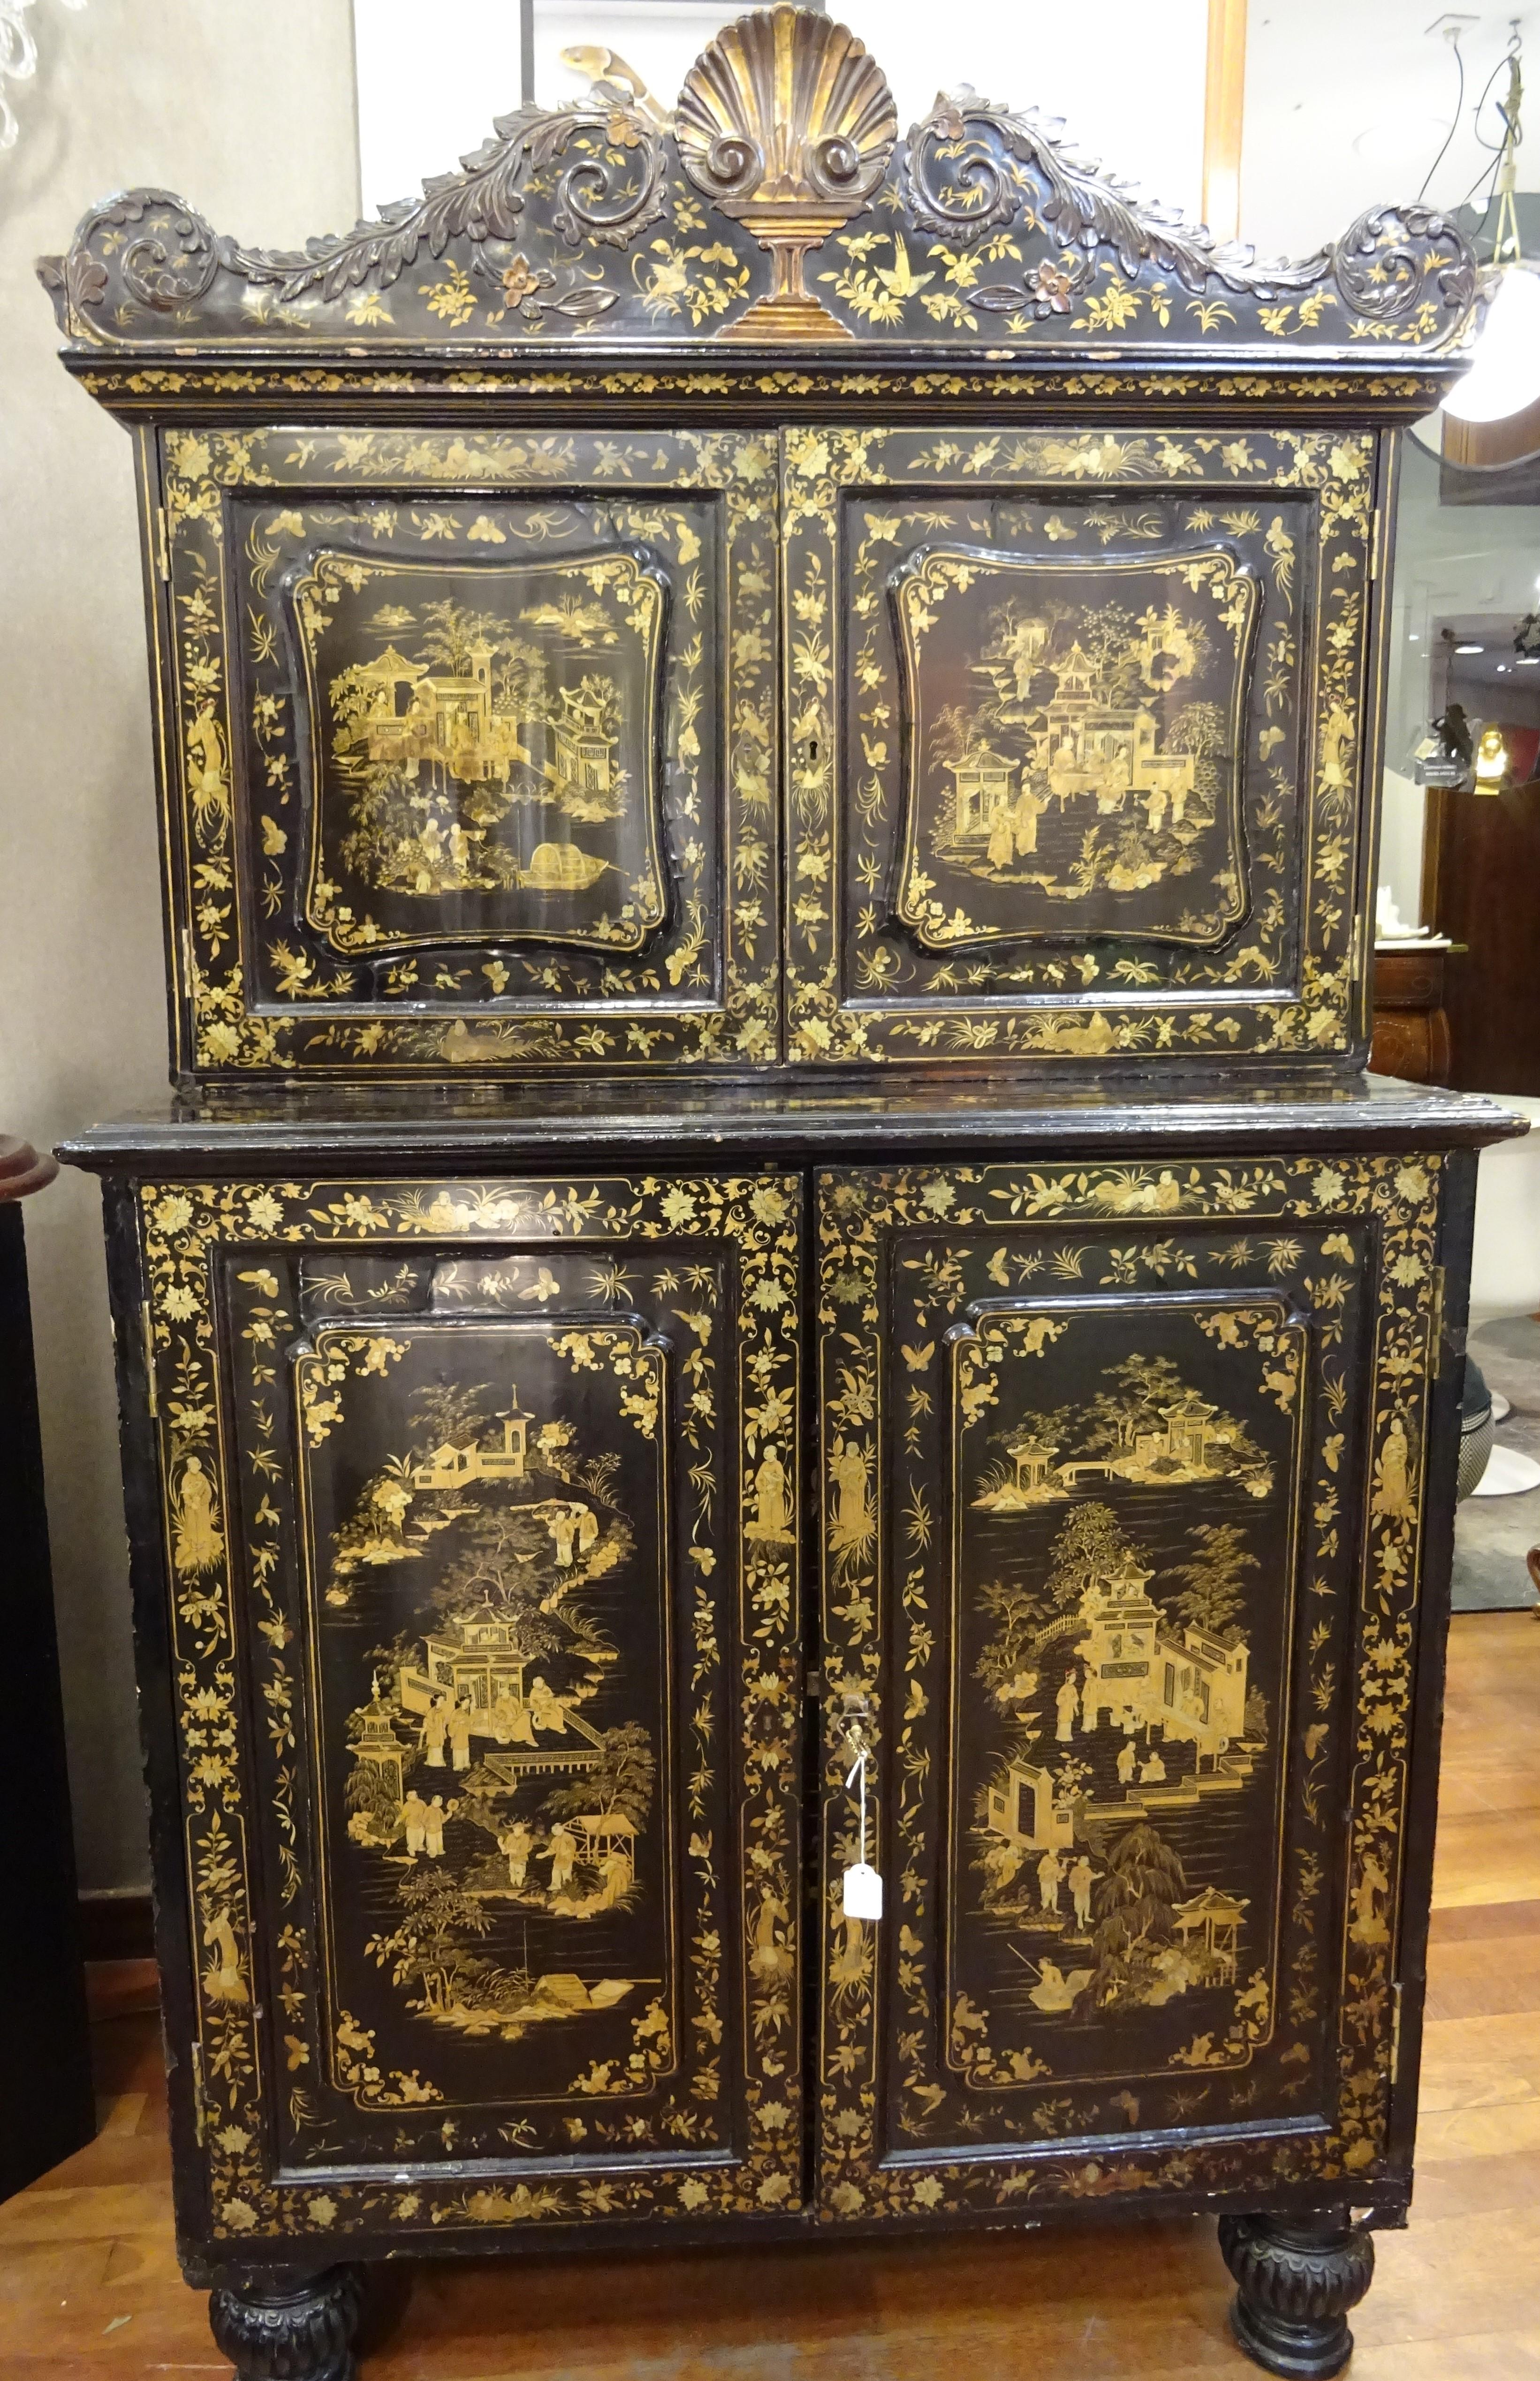 One of a kind Chinese cabinet make for the exportation, from a English very important private collection.
It has two parts with doors, inside there are a lot of drawers with bone handle, also there is a little mirror on top of the cabinet. It's